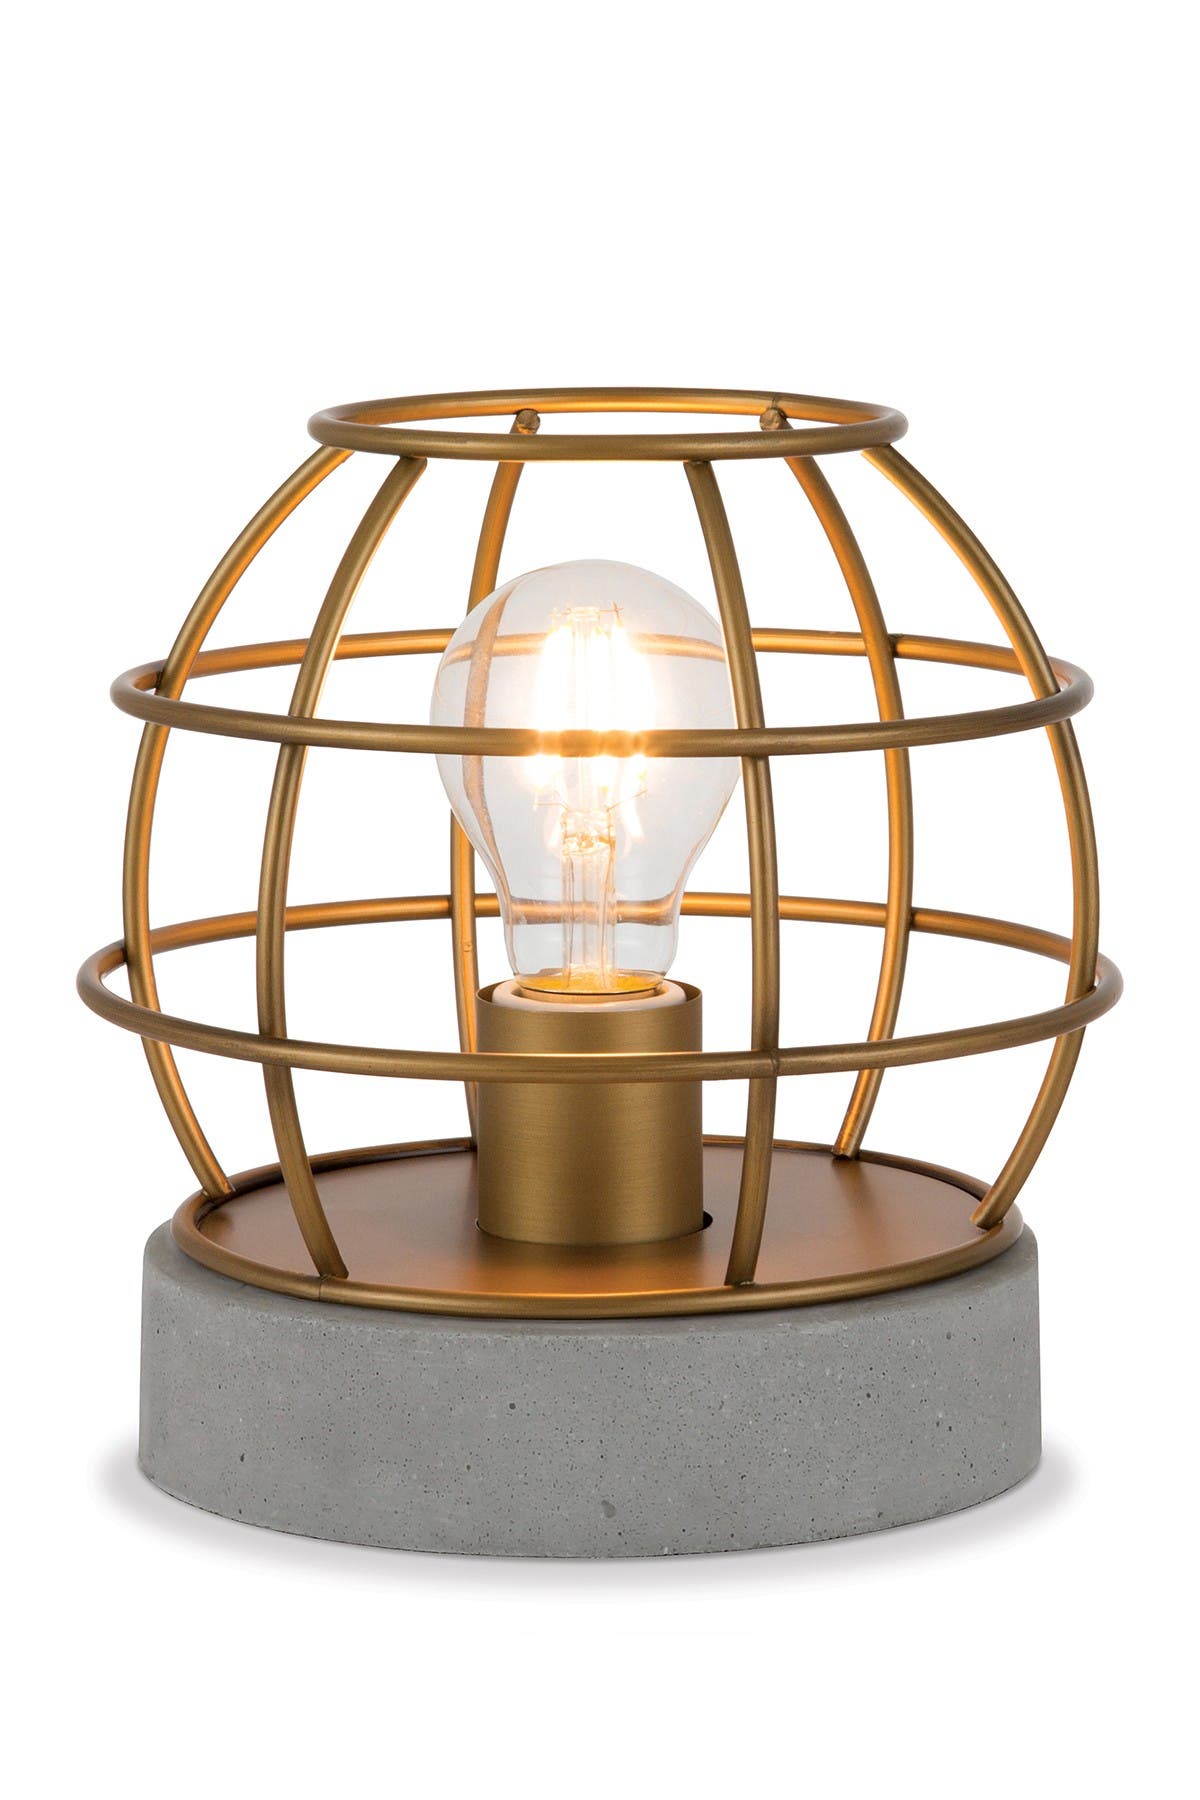 Addison And Lane Kennet Table Lamp With Antique Brass Cage & Concrete Pedestal In Medium Brown1